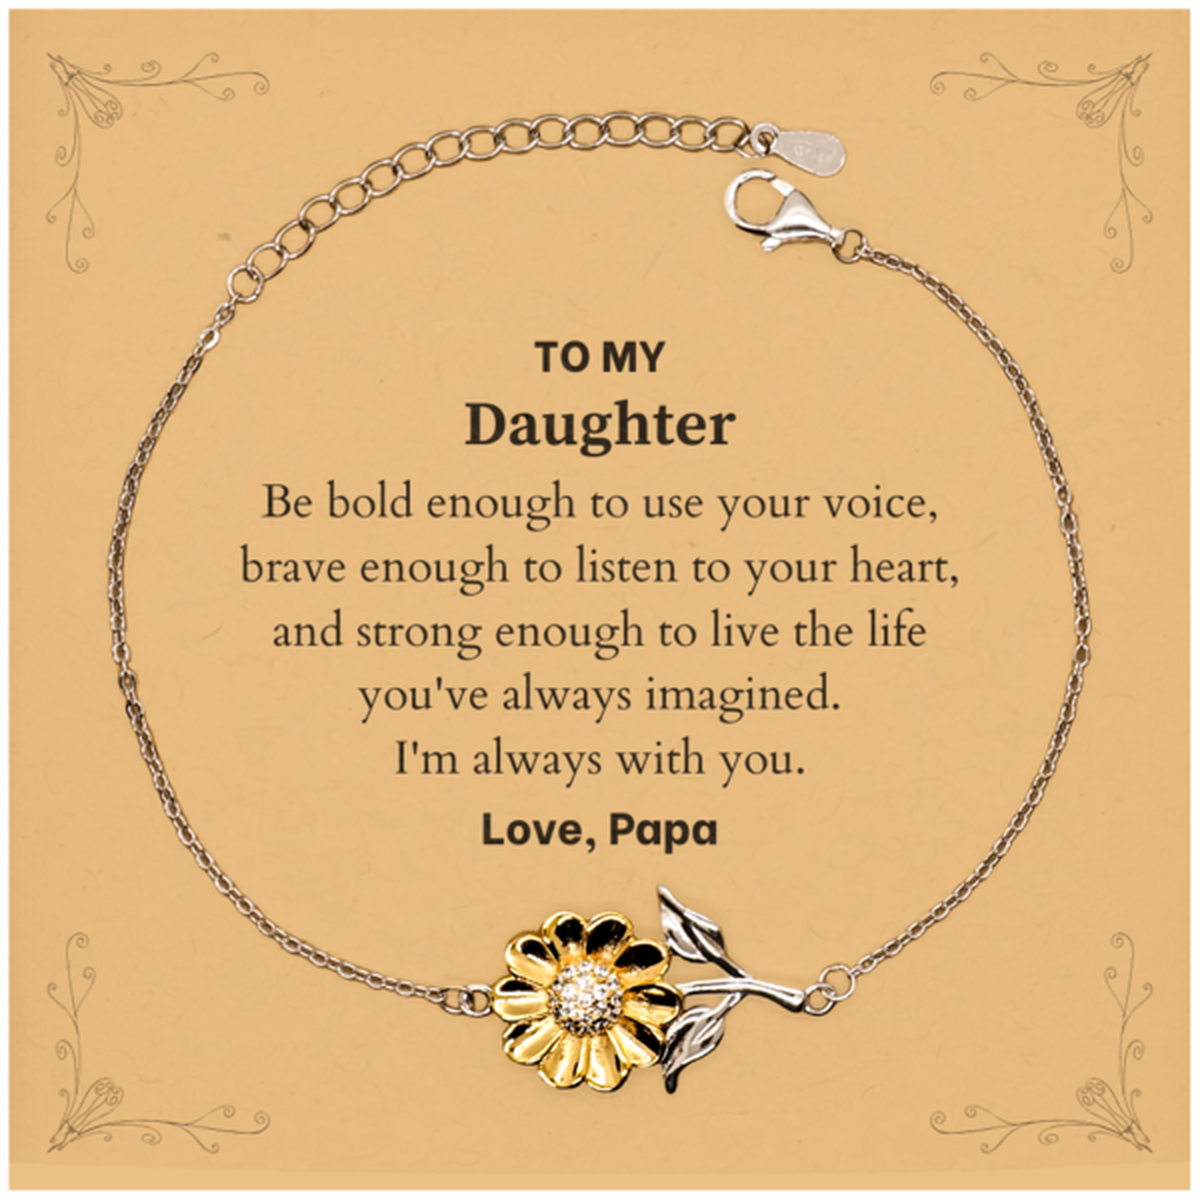 Keepsake Daughter Sunflower Bracelet Gift Idea Graduation Christmas Birthday Daughter from Papa, Daughter Be bold enough to use your voice, brave enough to listen to your heart. Love, Papa